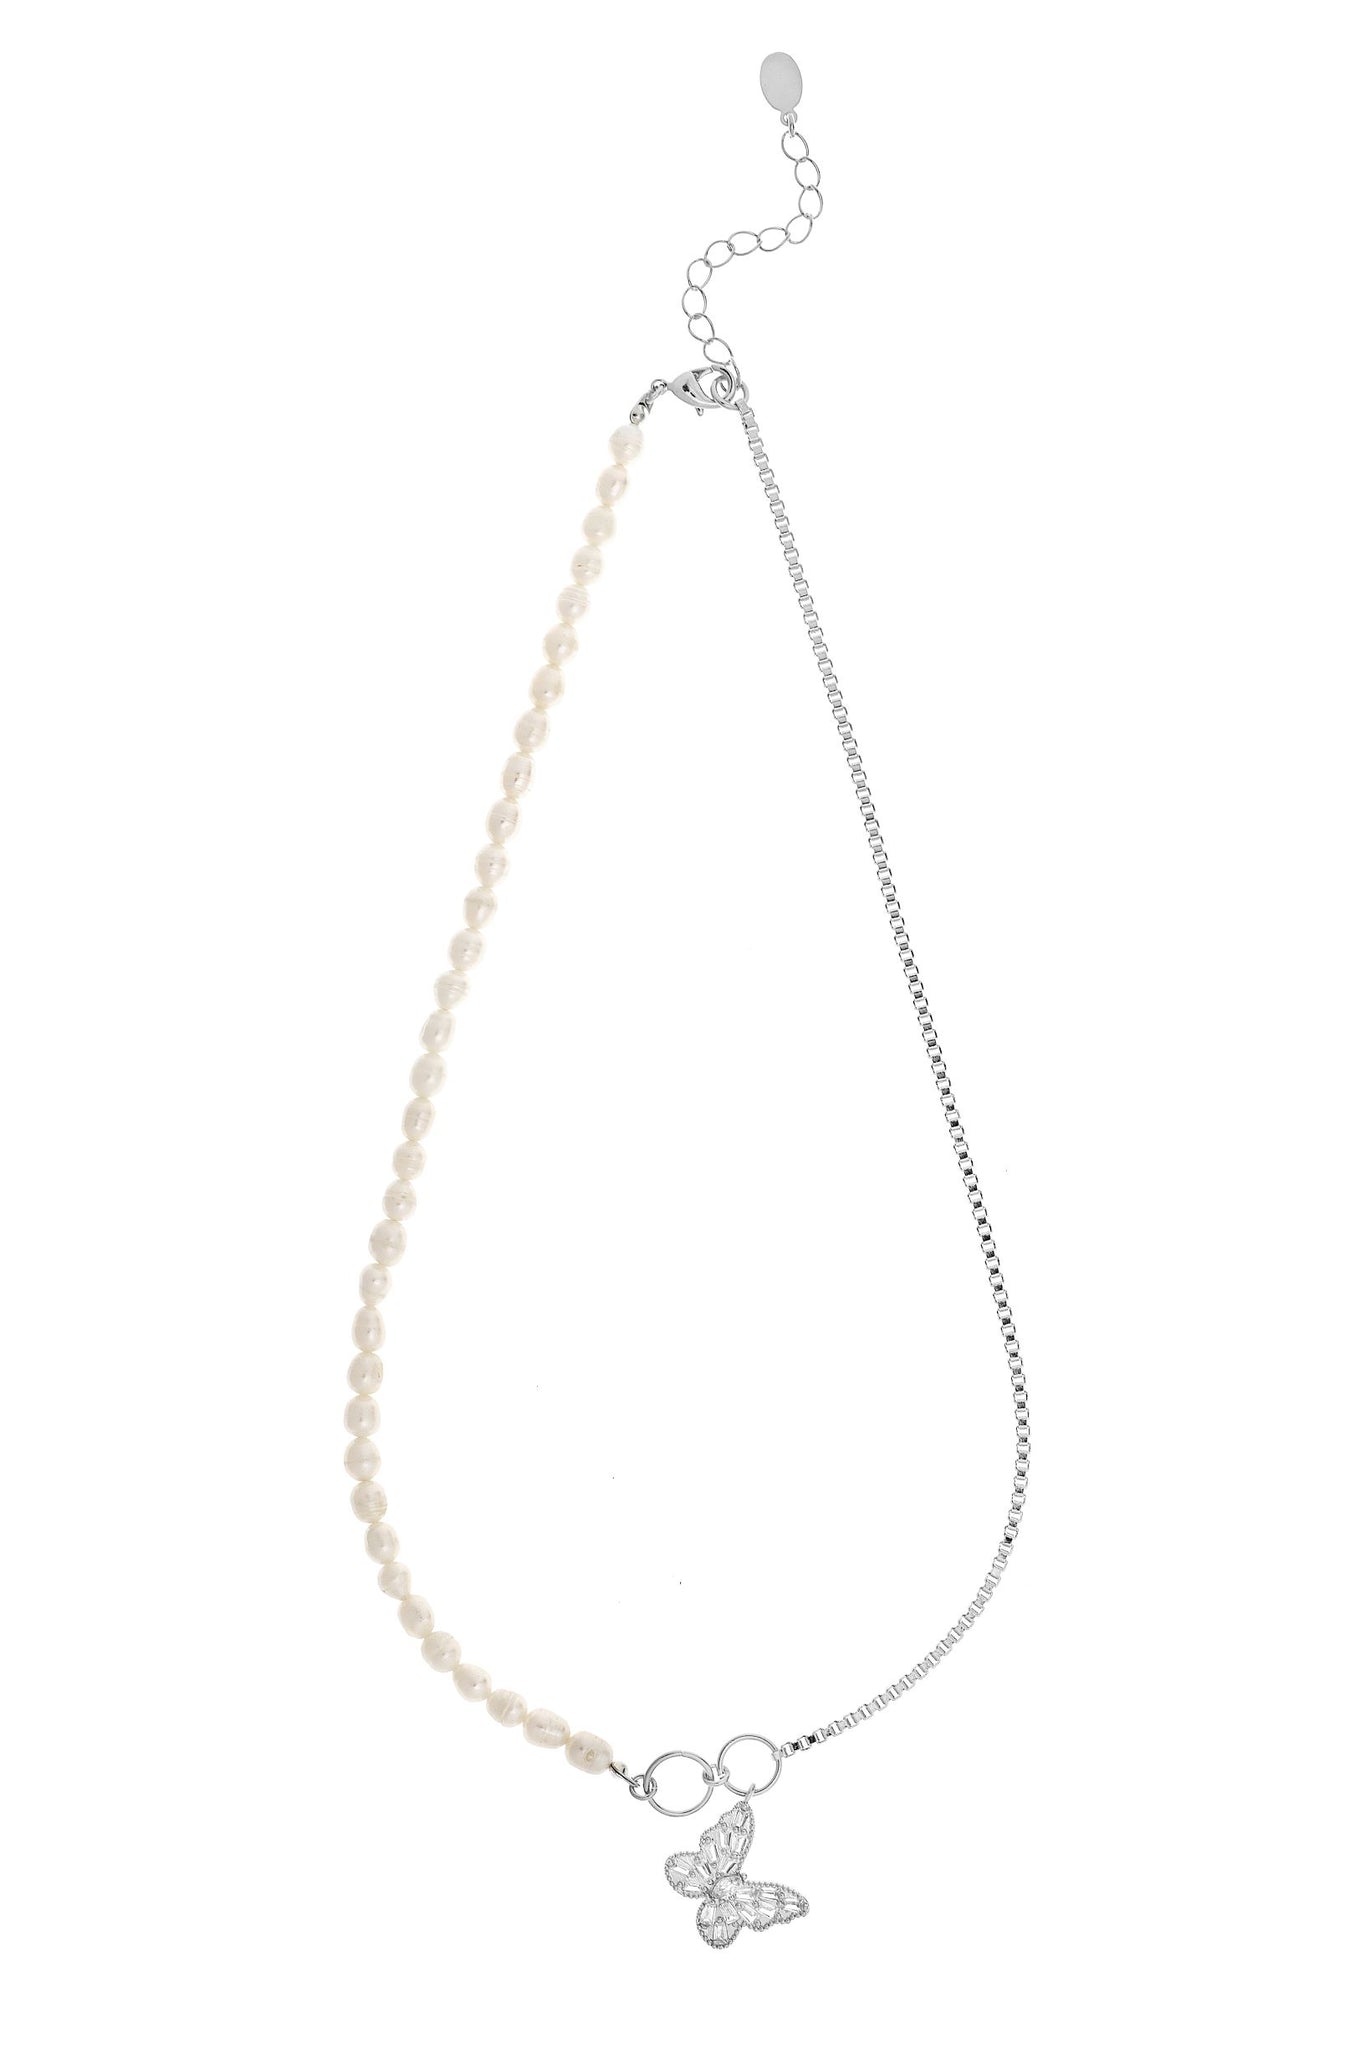 Rhodium Pearl & Chain Necklace with Butterfly CZ Charm